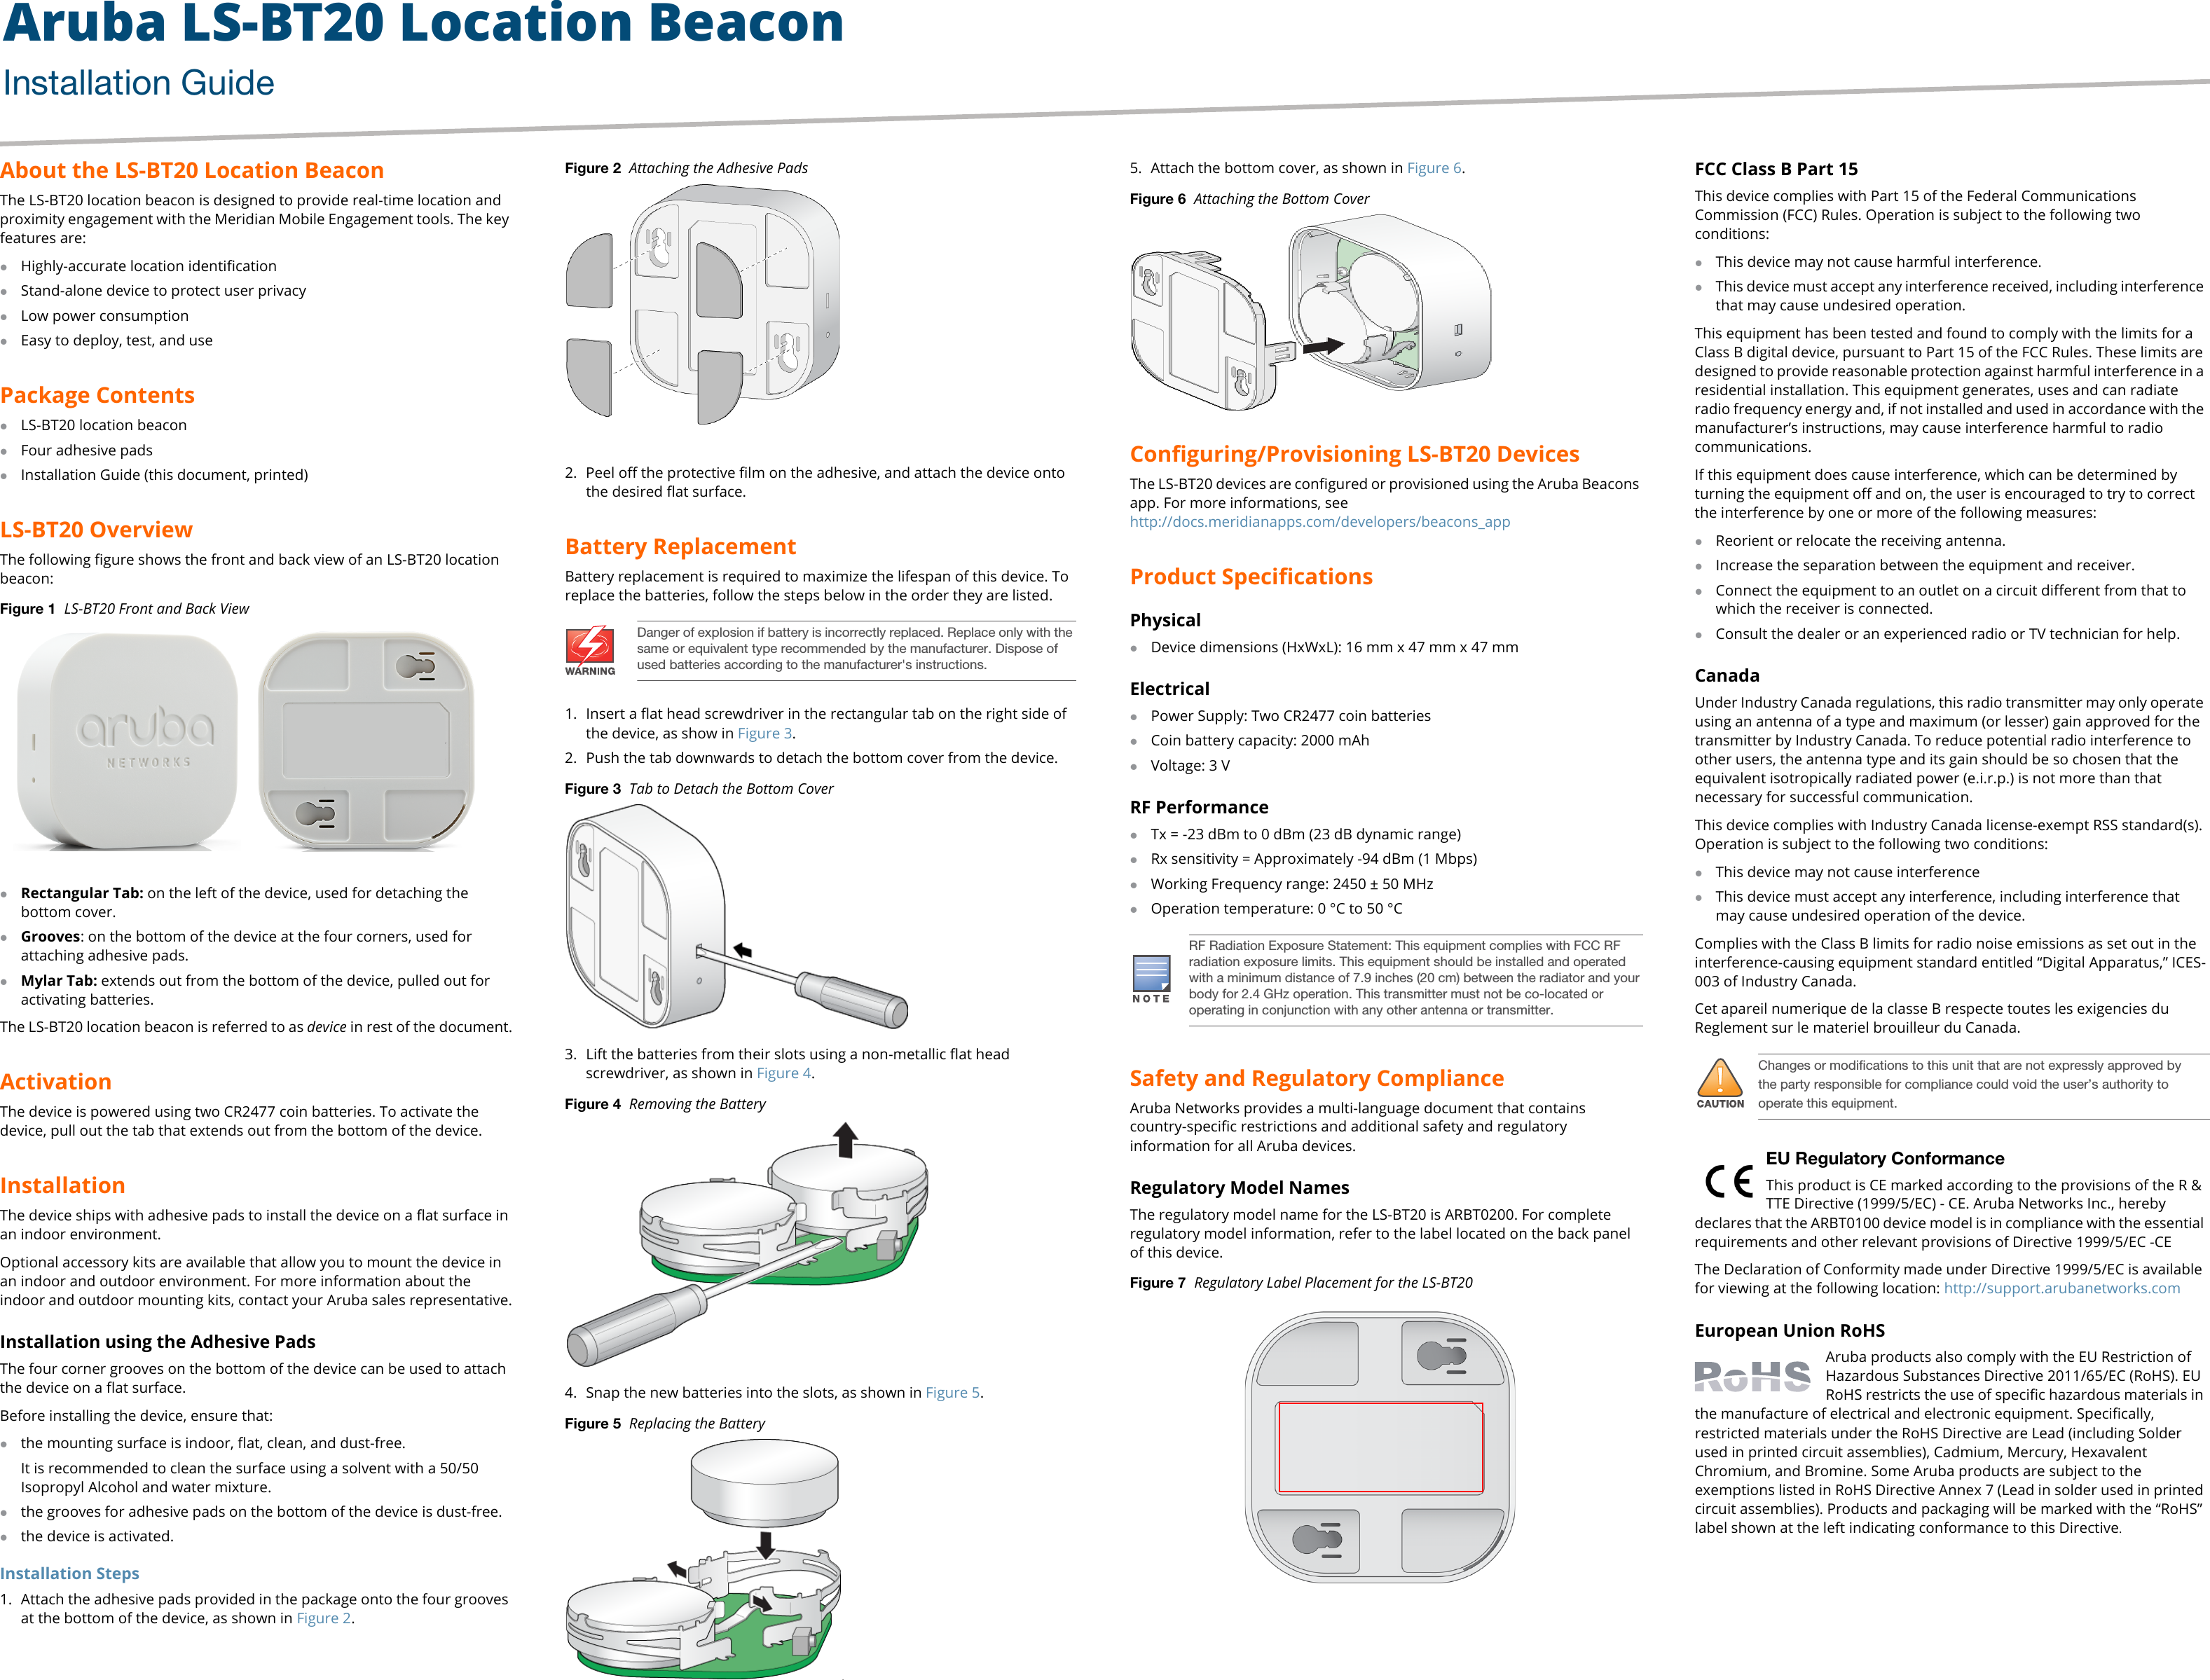 Aruba LS-BT20 Location BeaconInstallation Guide About the LS-BT20 Location BeaconThe LS-BT20 location beacon is designed to provide real-time location and proximity engagement with the Meridian Mobile Engagement tools. The key features are:Highly-accurate location identificationStand-alone device to protect user privacyLow power consumptionEasy to deploy, test, and usePackage ContentsLS-BT20 location beacon Four adhesive padsInstallation Guide (this document, printed)LS-BT20 OverviewThe following figure shows the front and back view of an LS-BT20 location beacon: Figure 1  LS-BT20 Front and Back ViewRectangular Tab: on the left of the device, used for detaching the bottom cover.Grooves: on the bottom of the device at the four corners, used for attaching adhesive pads.Mylar Tab: extends out from the bottom of the device, pulled out for activating batteries.The LS-BT20 location beacon is referred to as device in rest of the document.ActivationThe device is powered using two CR2477 coin batteries. To activate the device, pull out the tab that extends out from the bottom of the device.InstallationThe device ships with adhesive pads to install the device on a flat surface in an indoor environment. Optional accessory kits are available that allow you to mount the device in an indoor and outdoor environment. For more information about the indoor and outdoor mounting kits, contact your Aruba sales representative.Installation using the Adhesive PadsThe four corner grooves on the bottom of the device can be used to attach the device on a flat surface.Before installing the device, ensure that:the mounting surface is indoor, flat, clean, and dust-free.It is recommended to clean the surface using a solvent with a 50/50 Isopropyl Alcohol and water mixture.the grooves for adhesive pads on the bottom of the device is dust-free.the device is activated.Installation Steps1. Attach the adhesive pads provided in the package onto the four grooves at the bottom of the device, as shown in Figure 2.Figure 2  Attaching the Adhesive Pads2. Peel off the protective film on the adhesive, and attach the device onto the desired flat surface.Battery Replacement Battery replacement is required to maximize the lifespan of this device. To replace the batteries, follow the steps below in the order they are listed.1. Insert a flat head screwdriver in the rectangular tab on the right side of the device, as show in Figure 3.2. Push the tab downwards to detach the bottom cover from the device.Figure 3  Tab to Detach the Bottom Cover3. Lift the batteries from their slots using a non-metallic flat head screwdriver, as shown in Figure 4.Figure 4  Removing the Battery4. Snap the new batteries into the slots, as shown in Figure 5.Figure 5  Replacing the Battery.5. Attach the bottom cover, as shown in Figure 6.Figure 6  Attaching the Bottom CoverConfiguring/Provisioning LS-BT20 DevicesThe LS-BT20 devices are configured or provisioned using the Aruba Beacons app. For more informations, seehttp://docs.meridianapps.com/developers/beacons_appProduct SpecificationsPhysicalDevice dimensions (HxWxL): 16 mm x 47 mm x 47 mmElectricalPower Supply: Two CR2477 coin batteriesCoin battery capacity: 2000 mAhVoltage: 3 VRF PerformanceTx = -23 dBm to 0 dBm (23 dB dynamic range)Rx sensitivity = Approximately -94 dBm (1 Mbps)Working Frequency range: 2450 ± 50 MHzOperation temperature: 0 °C to 50 °CSafety and Regulatory ComplianceAruba Networks provides a multi-language document that contains country-specific restrictions and additional safety and regulatory information for all Aruba devices. Regulatory Model NamesThe regulatory model name for the LS-BT20 is ARBT0200. For complete regulatory model information, refer to the label located on the back panel of this device.Figure 7  Regulatory Label Placement for the LS-BT20 FCC Class B Part 15This device complies with Part 15 of the Federal Communications Commission (FCC) Rules. Operation is subject to the following two conditions:This device may not cause harmful interference.This device must accept any interference received, including interference that may cause undesired operation. This equipment has been tested and found to comply with the limits for a Class B digital device, pursuant to Part 15 of the FCC Rules. These limits are designed to provide reasonable protection against harmful interference in a residential installation. This equipment generates, uses and can radiate radio frequency energy and, if not installed and used in accordance with the manufacturer’s instructions, may cause interference harmful to radio communications.If this equipment does cause interference, which can be determined by turning the equipment off and on, the user is encouraged to try to correct the interference by one or more of the following measures:Reorient or relocate the receiving antenna.Increase the separation between the equipment and receiver.Connect the equipment to an outlet on a circuit different from that to which the receiver is connected.Consult the dealer or an experienced radio or TV technician for help.Canada Under Industry Canada regulations, this radio transmitter may only operate using an antenna of a type and maximum (or lesser) gain approved for the transmitter by Industry Canada. To reduce potential radio interference to other users, the antenna type and its gain should be so chosen that the equivalent isotropically radiated power (e.i.r.p.) is not more than that necessary for successful communication.This device complies with Industry Canada license-exempt RSS standard(s). Operation is subject to the following two conditions: This device may not cause interferenceThis device must accept any interference, including interference that may cause undesired operation of the device.Complies with the Class B limits for radio noise emissions as set out in the interference-causing equipment standard entitled “Digital Apparatus,” ICES-003 of Industry Canada.Cet apareil numerique de la classe B respecte toutes les exigencies du Reglement sur le materiel brouilleur du Canada. EU Regulatory Conformance This product is CE marked according to the provisions of the R &amp; TTE Directive (1999/5/EC) - CE. Aruba Networks Inc., hereby declares that the ARBT0100 device model is in compliance with the essential requirements and other relevant provisions of Directive 1999/5/EC -CEThe Declaration of Conformity made under Directive 1999/5/EC is available for viewing at the following location: http://support.arubanetworks.comEuropean Union RoHSAruba products also comply with the EU Restriction of Hazardous Substances Directive 2011/65/EC (RoHS). EU RoHS restricts the use of specific hazardous materials in the manufacture of electrical and electronic equipment. Specifically, restricted materials under the RoHS Directive are Lead (including Solder used in printed circuit assemblies), Cadmium, Mercury, Hexavalent Chromium, and Bromine. Some Aruba products are subject to the exemptions listed in RoHS Directive Annex 7 (Lead in solder used in printed circuit assemblies). Products and packaging will be marked with the “RoHS” label shown at the left indicating conformance to this Directive.Model: ARBT0200Model: ARBT0200IC: 4675A-ARBT0200FCC ID  Q9DARBT0200  Danger of explosion if battery is incorrectly replaced. Replace only with the same or equivalent type recommended by the manufacturer. Dispose of used batteries according to the manufacturer&apos;s instructions. RF Radiation Exposure Statement: This equipment complies with FCC RF radiation exposure limits. This equipment should be installed and operated with a minimum distance of 7.9 inches (20 cm) between the radiator and your body for 2.4 GHz operation. This transmitter must not be co-located or operating in conjunction with any other antenna or transmitter.!Changes or modifications to this unit that are not expressly approved by the party responsible for compliance could void the user’s authority to operate this equipment.